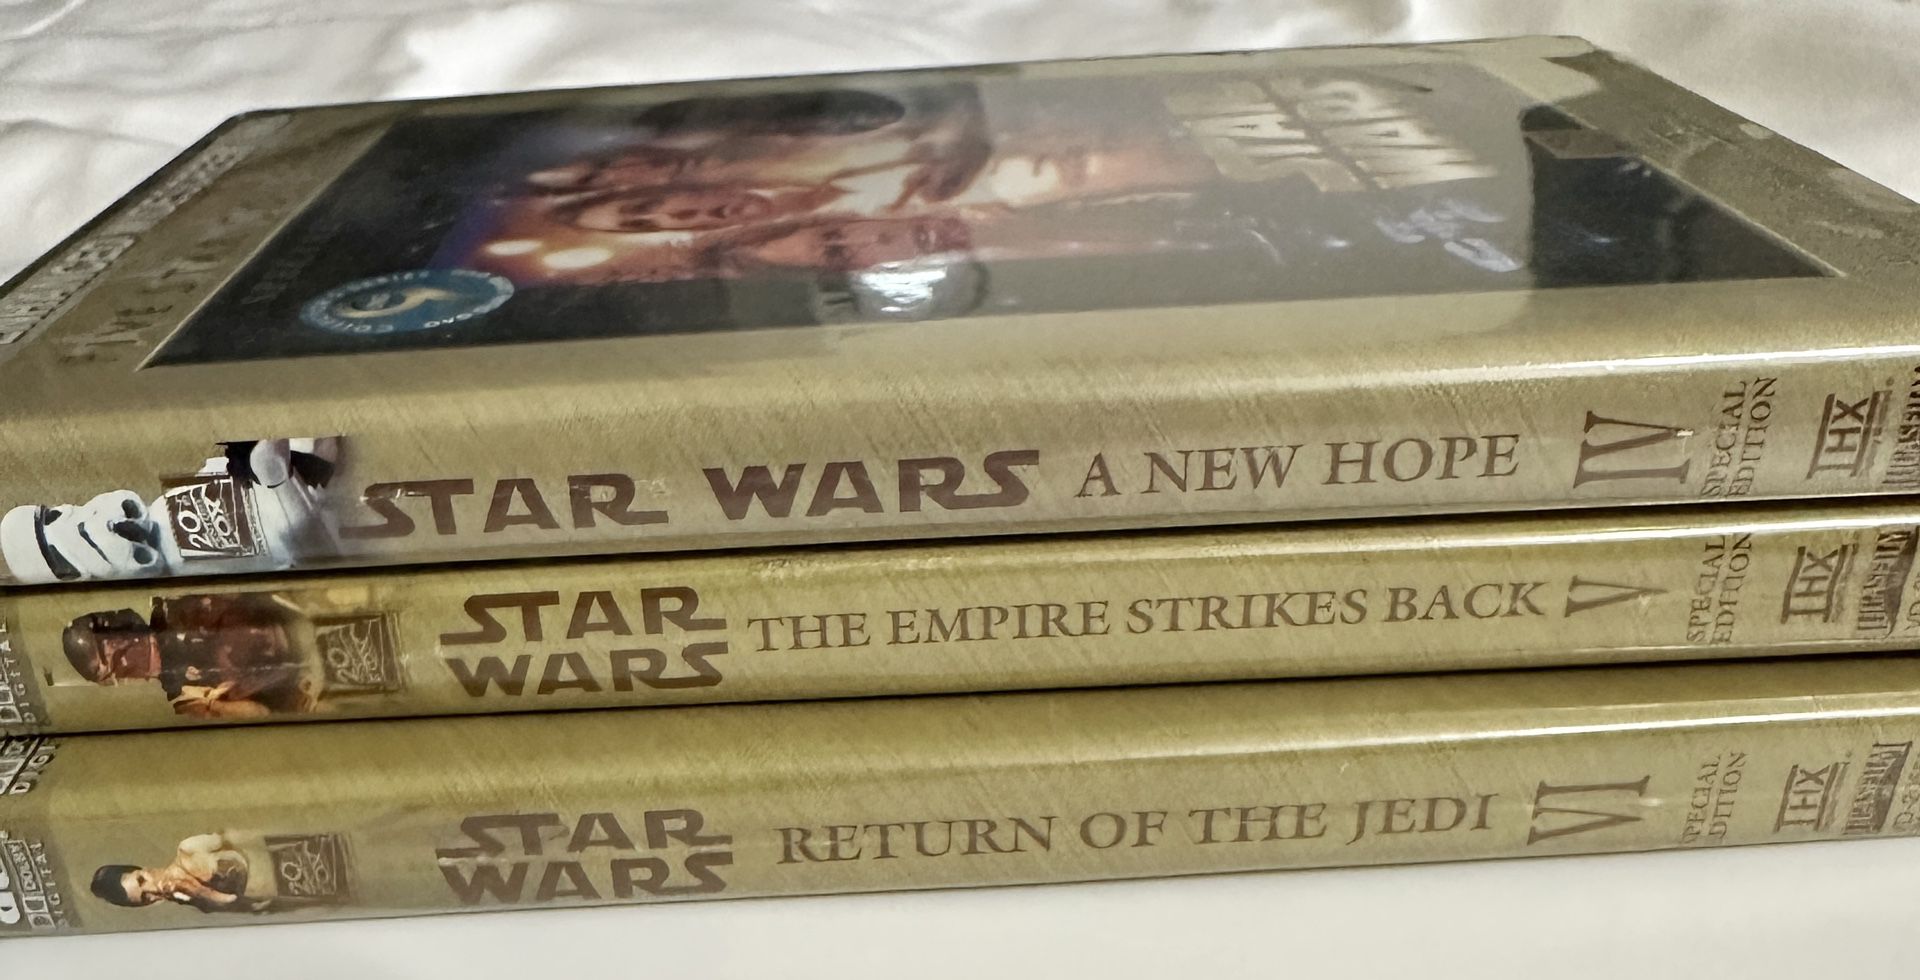 **Rare** Star Wars Five Star DVD Collection.  Collectors Series 